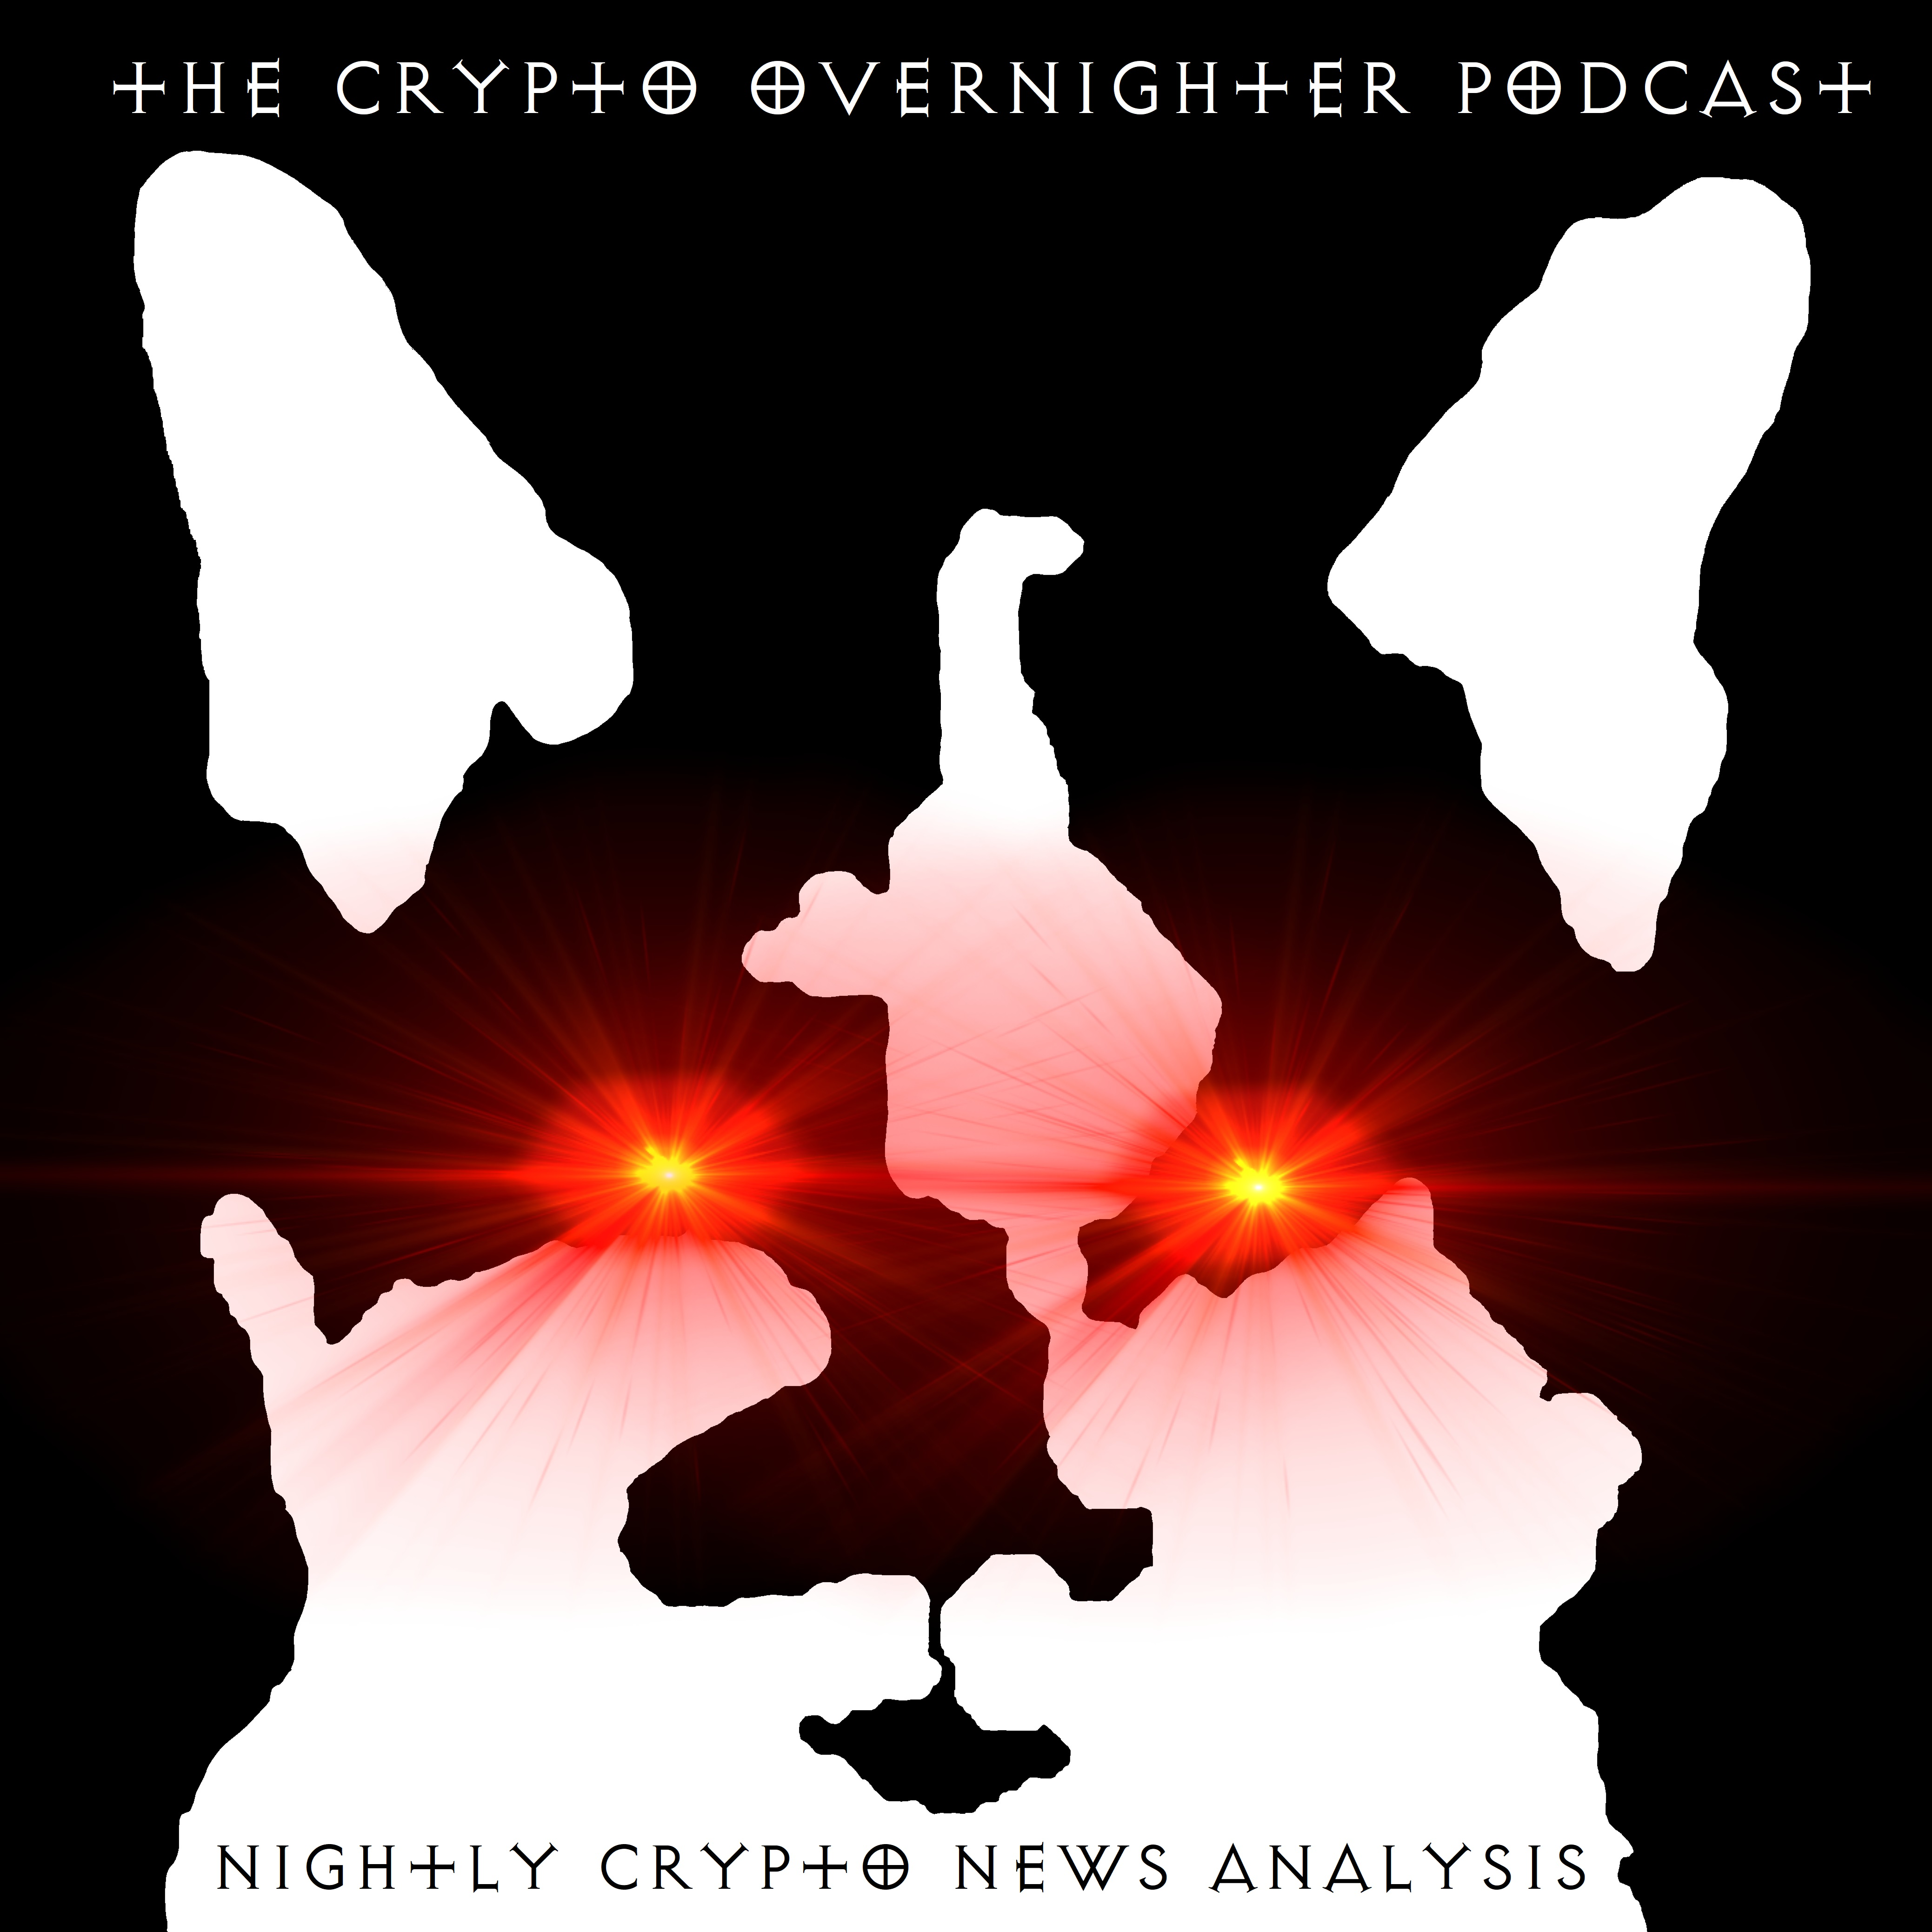 A highlight from 688:FTXs Legal Woes, Hong Kongs Crypto Surge, and CFTCs DeFi Focus